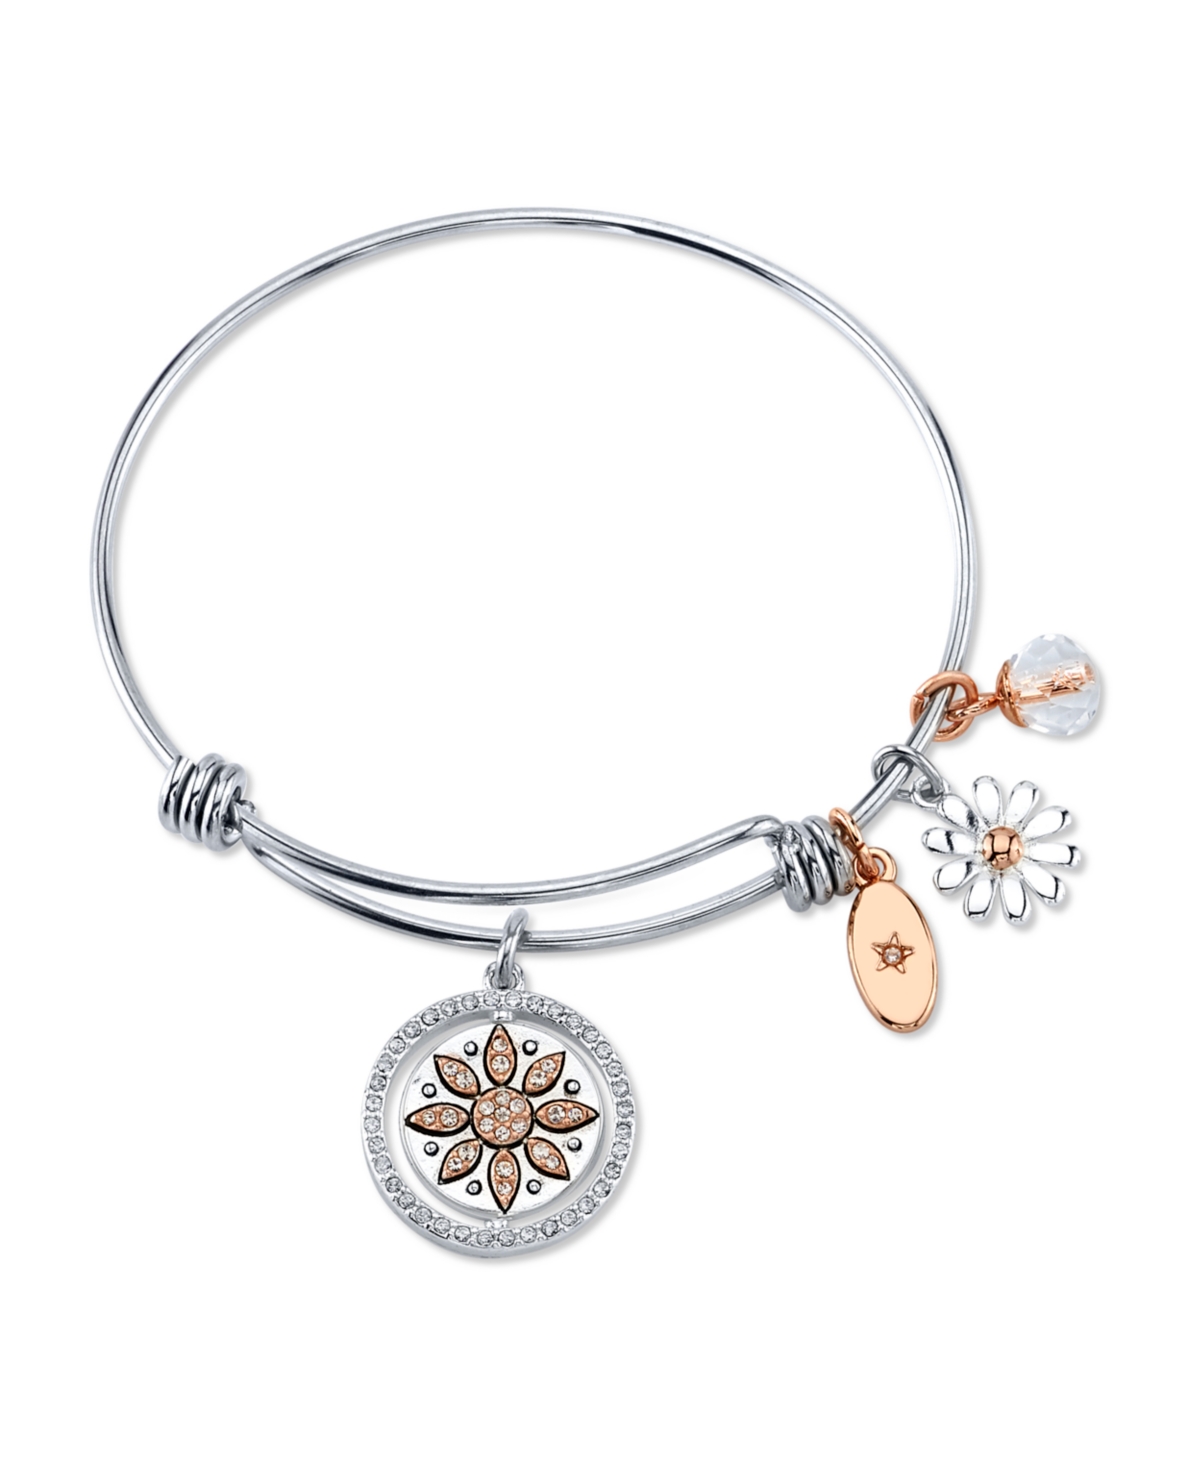 "Live Laugh Love" Flower Bangle Bracelet in Stainless Steel & Rose Gold-Tone with Silver Plated Charms - Rose Gold